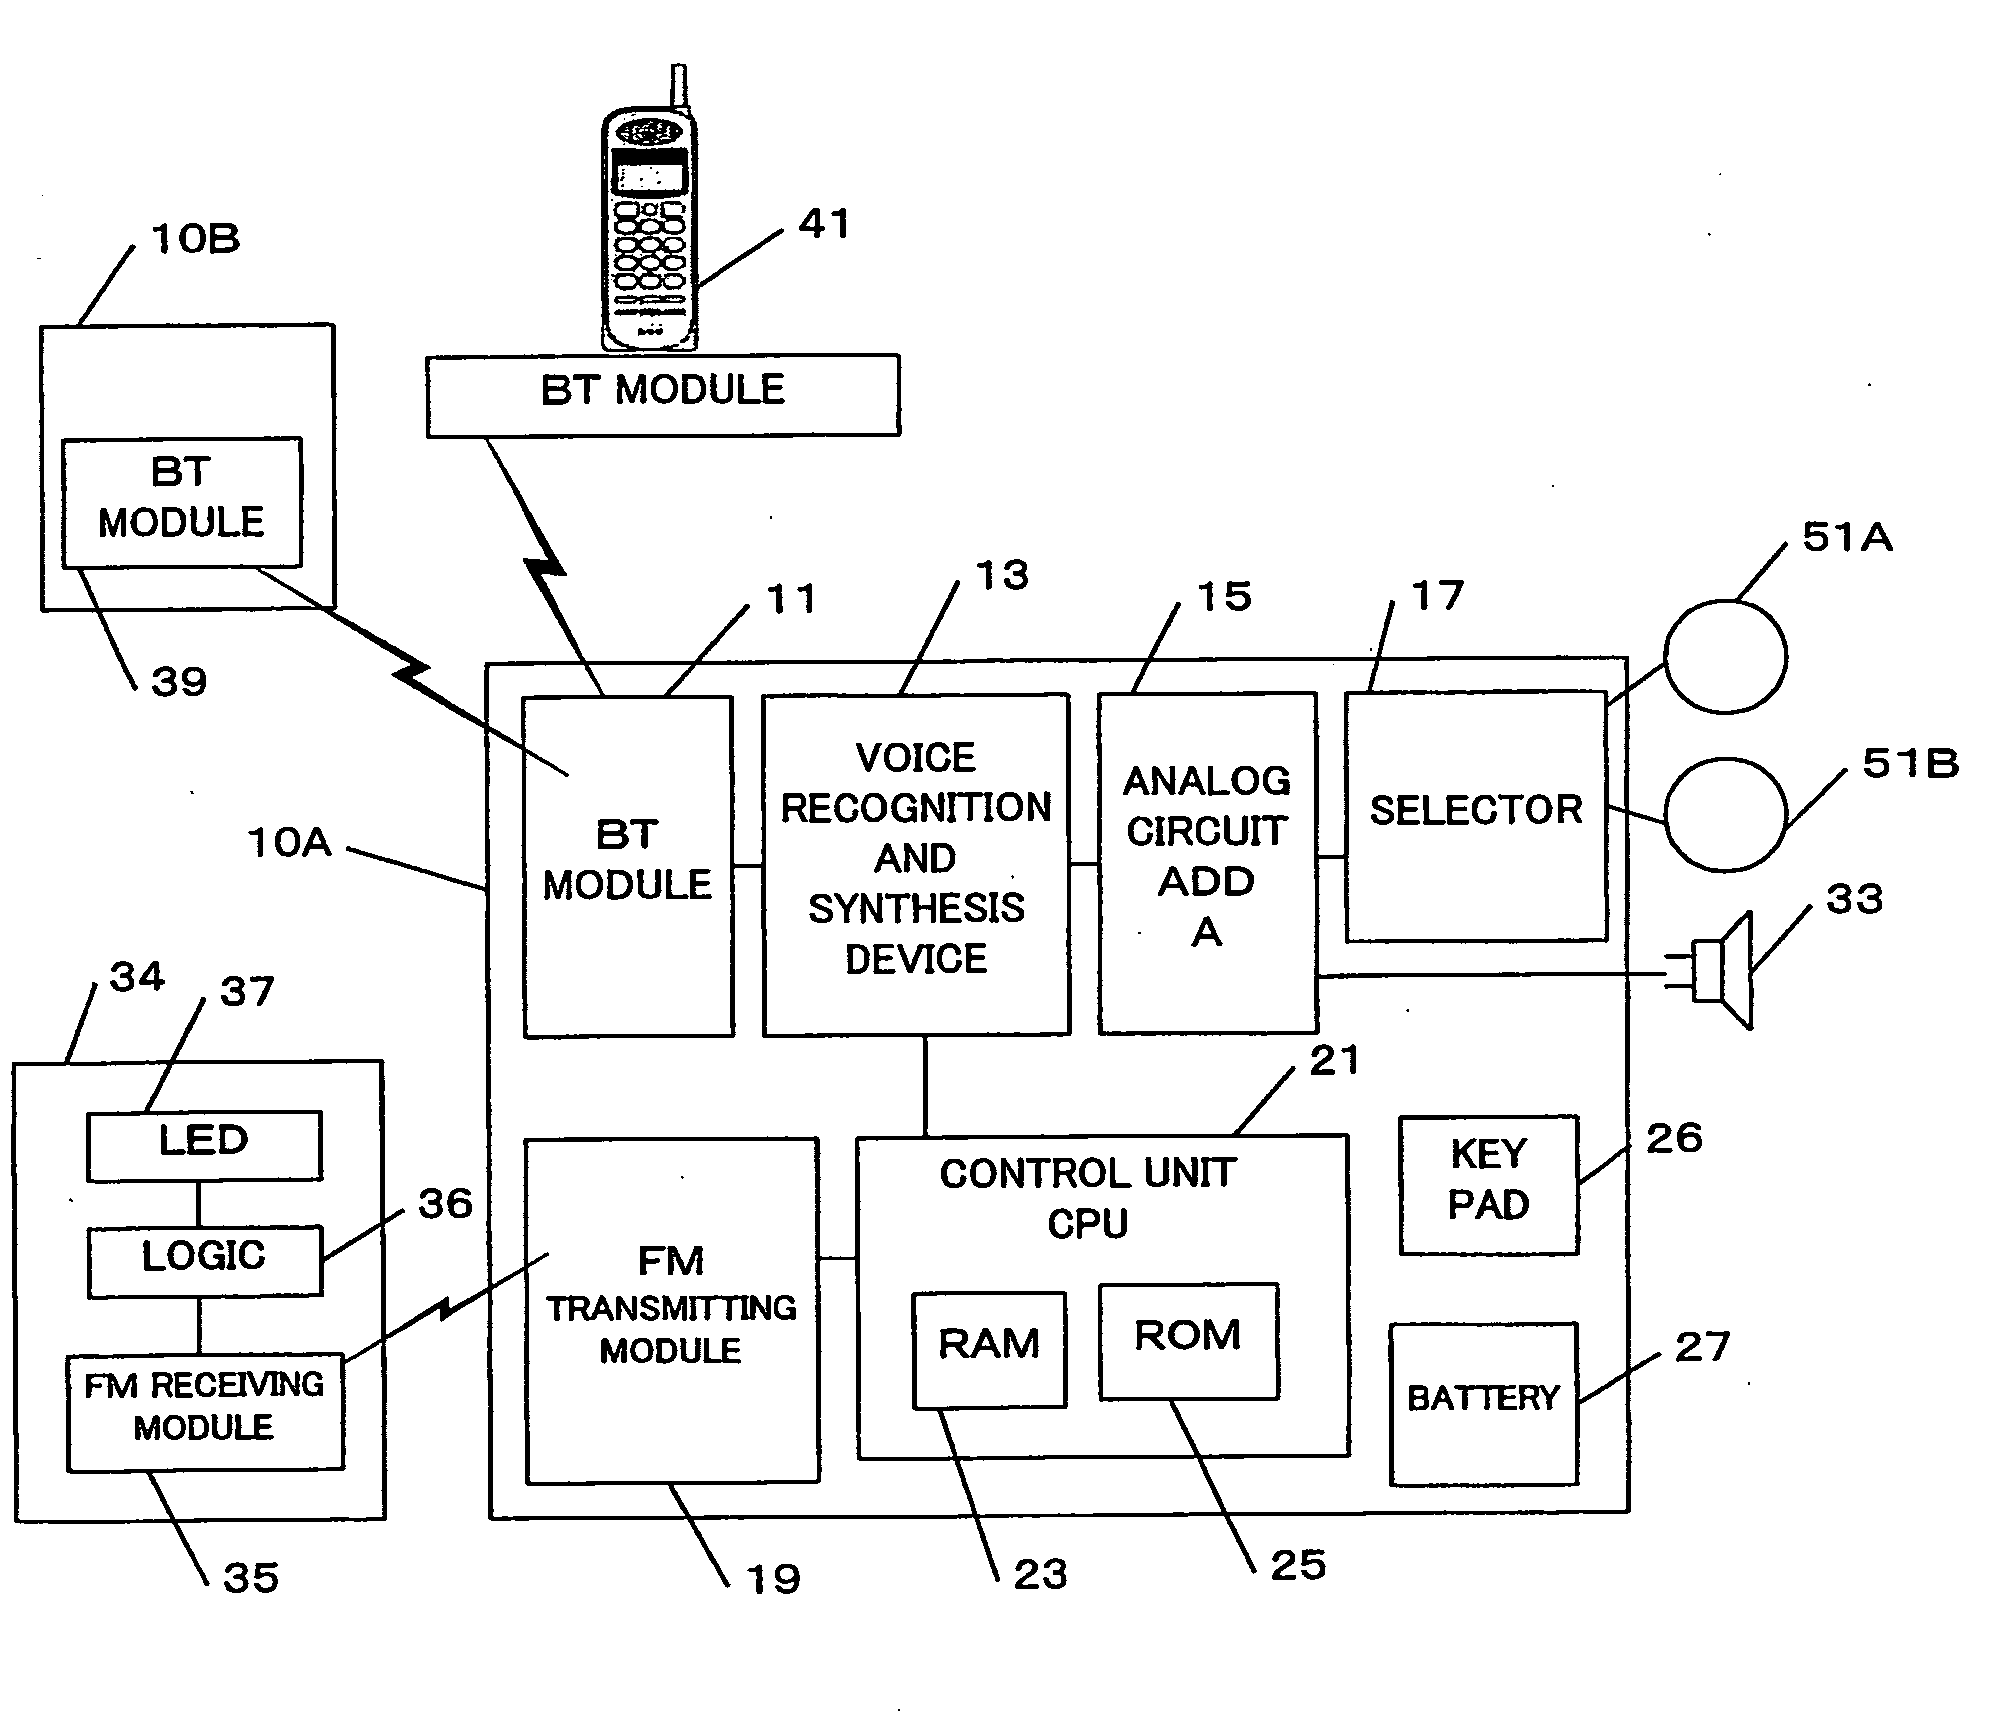 Bluetooth Communication System for Drivers of Vehicules